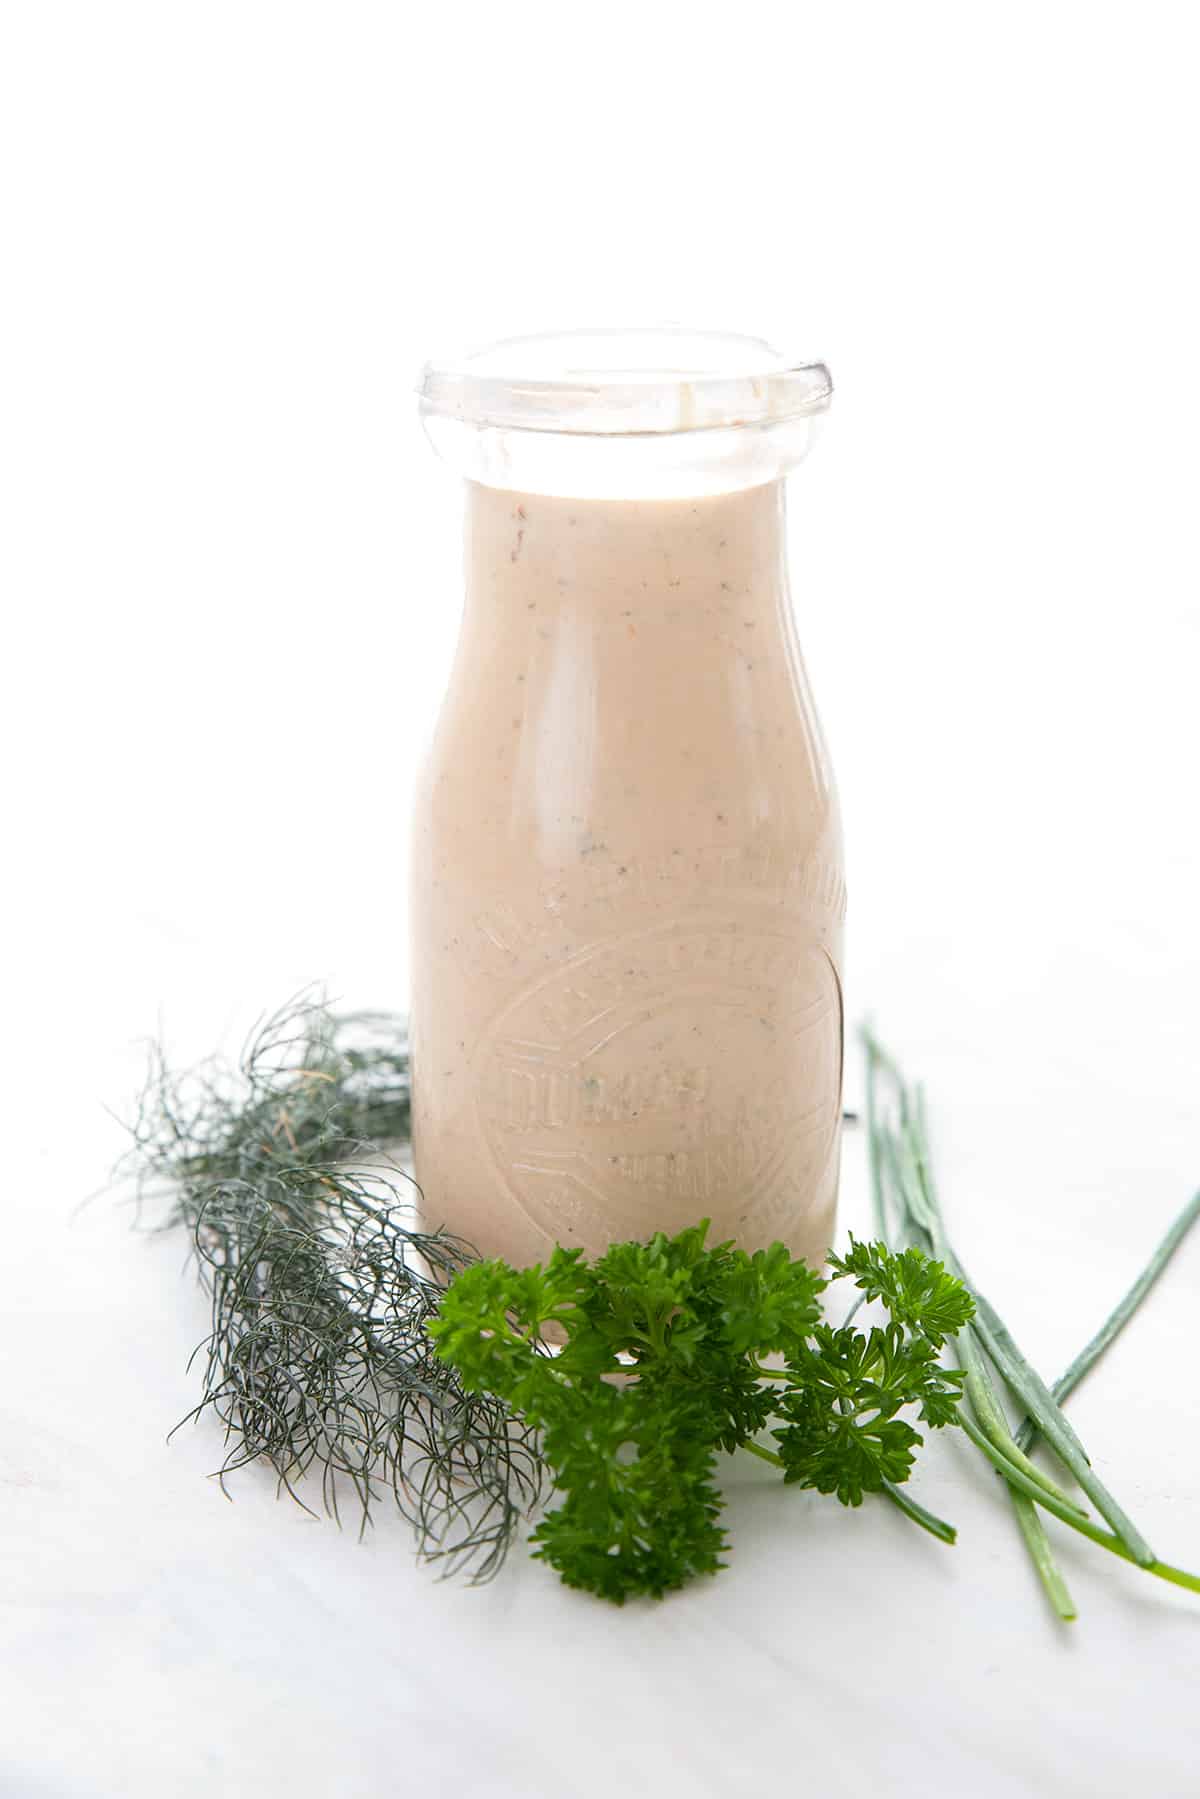 A glass bottle filled with chipotle ranch dressing surrounded by fresh herbs.